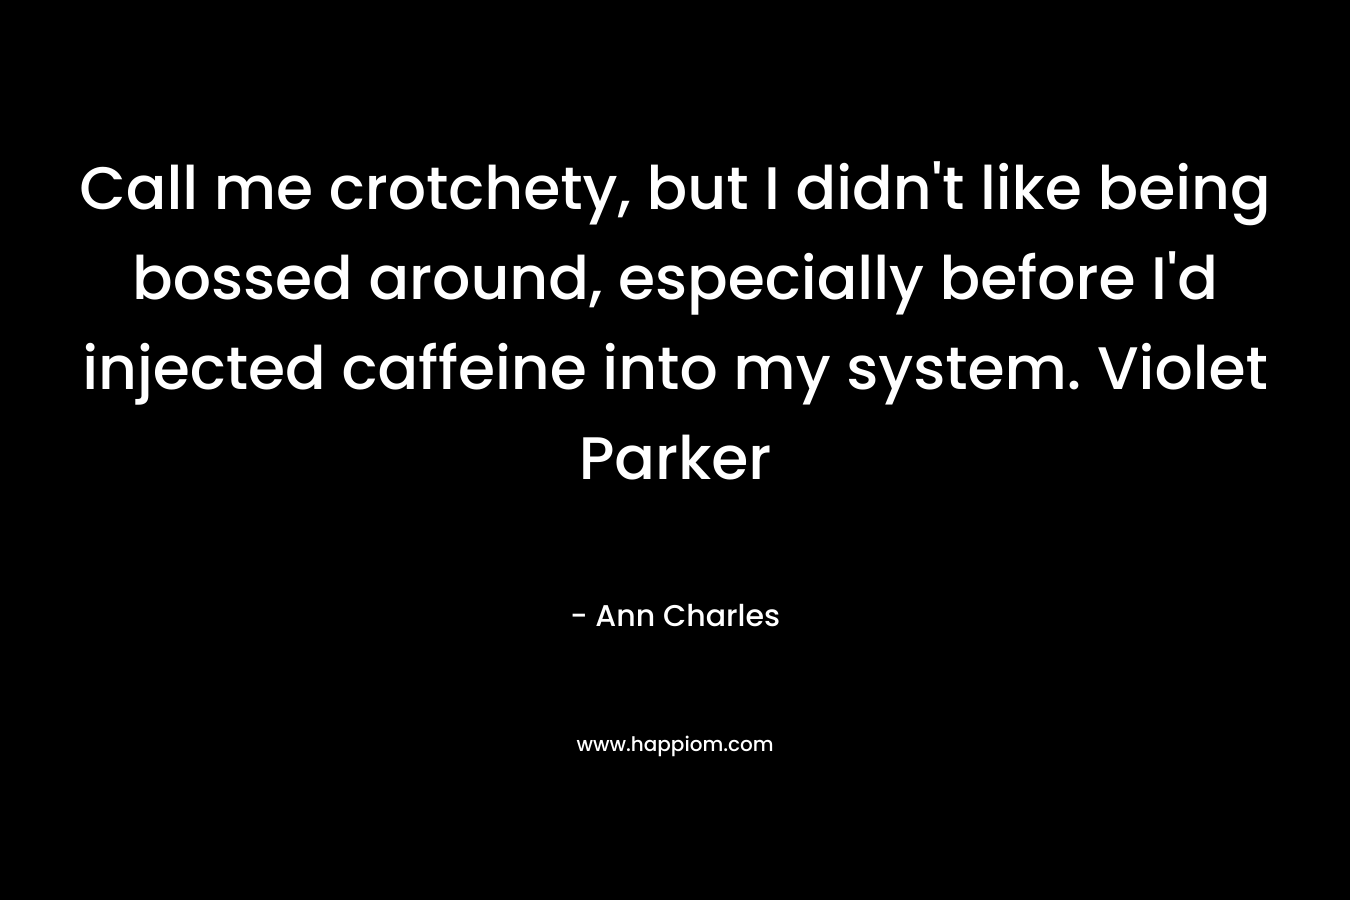 Call me crotchety, but I didn’t like being bossed around, especially before I’d injected caffeine into my system. Violet Parker – Ann Charles